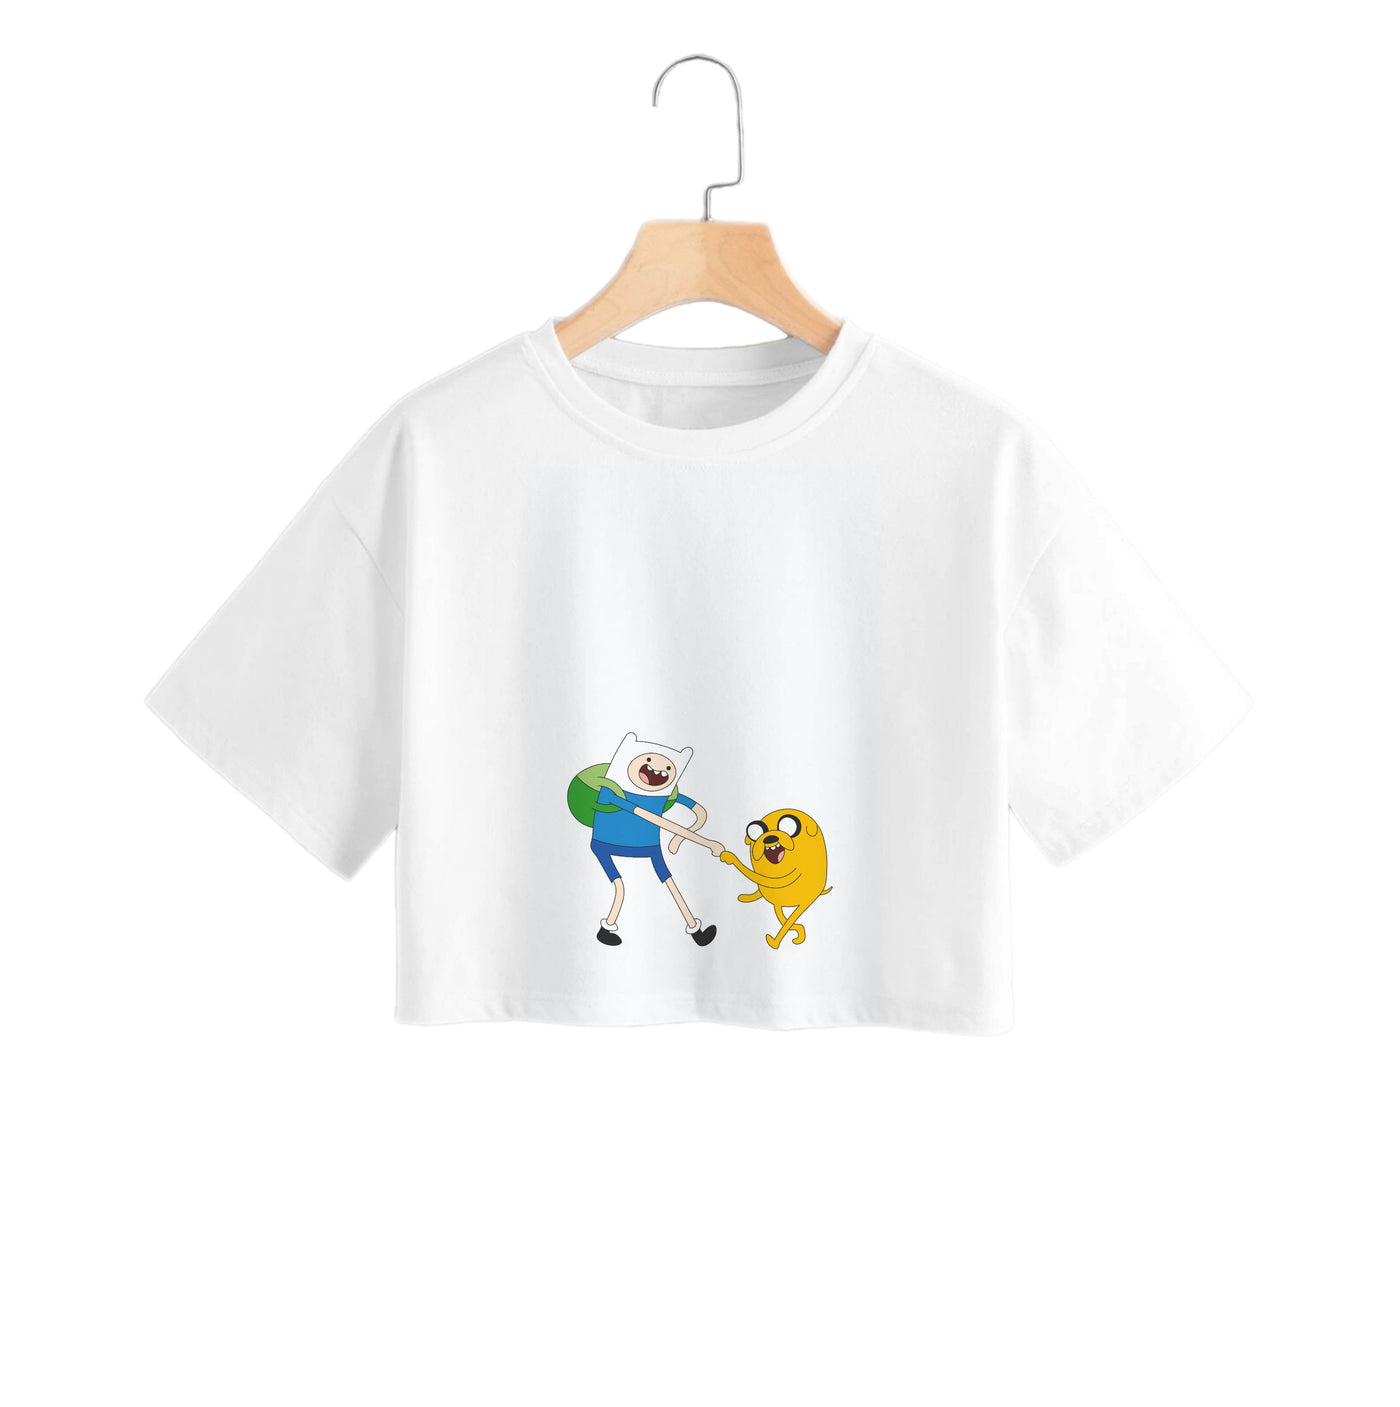 Jake The Dog And Finn The Human - Adventure Time Crop Top